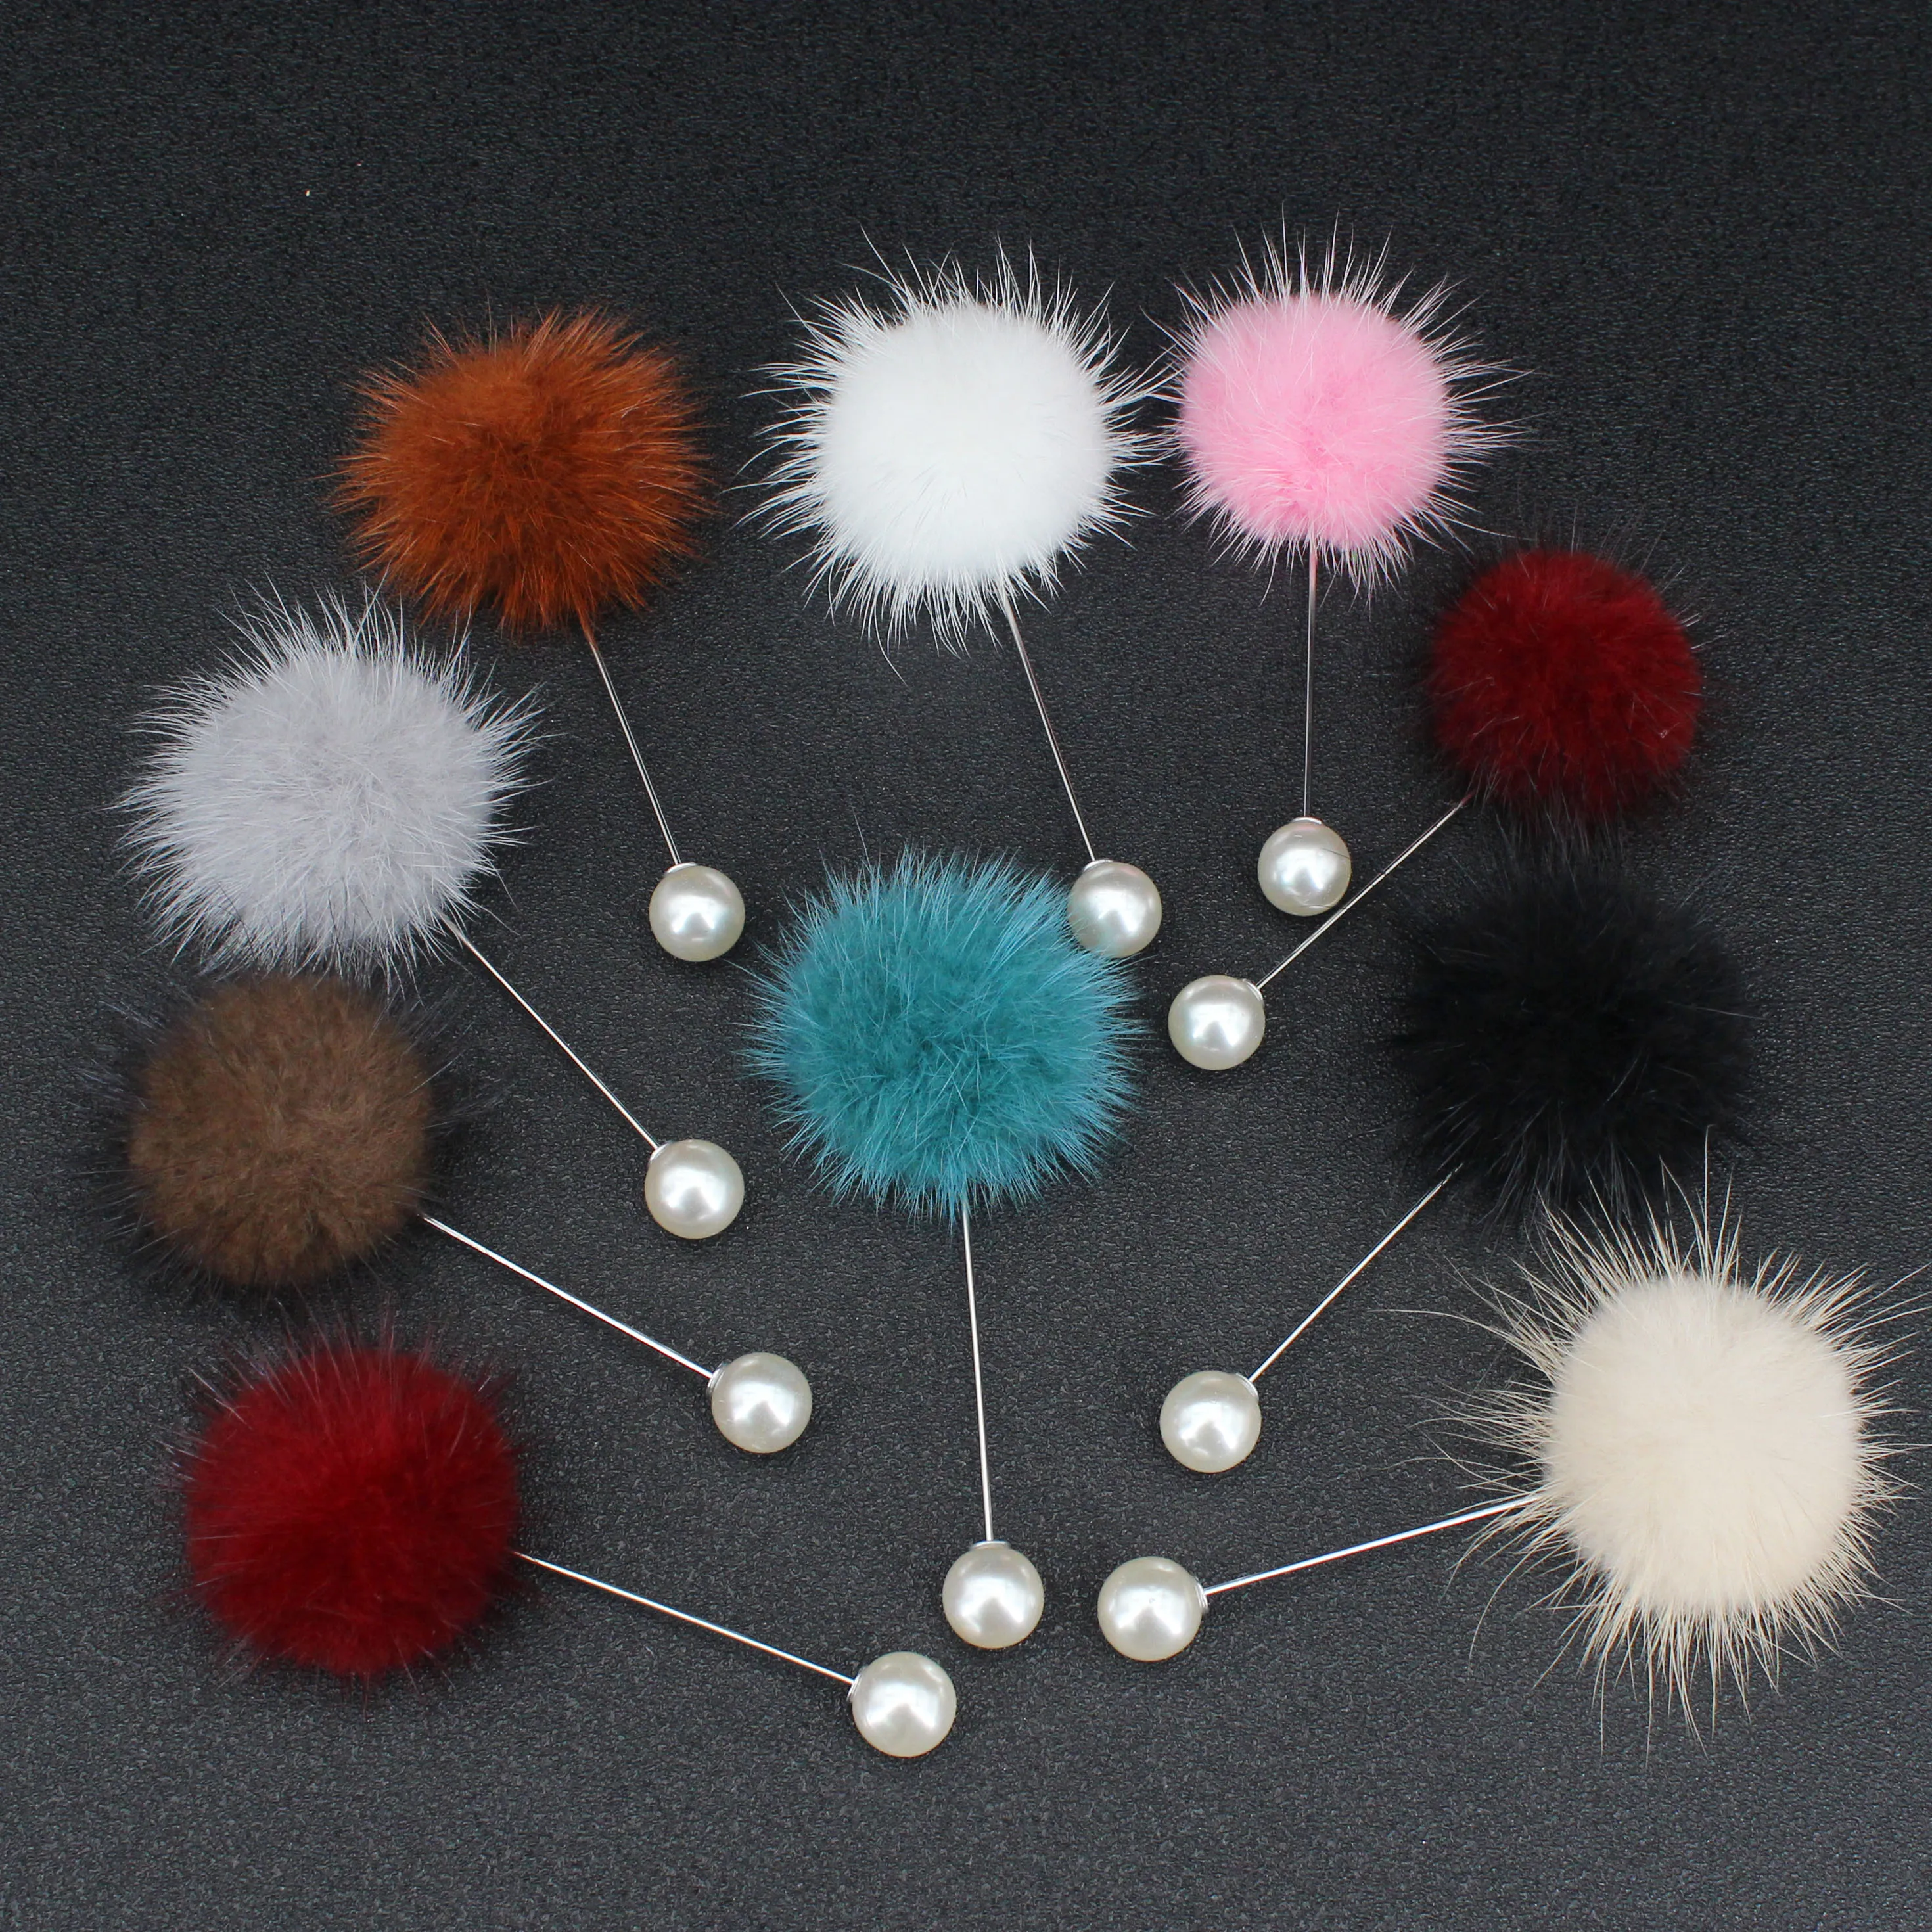 

New Cute Charm Simulated Pearl Brooch Pins For Women Korean Fur Ball Piercing Lapel Brooches Collar Jewelry Gift Kids Girls